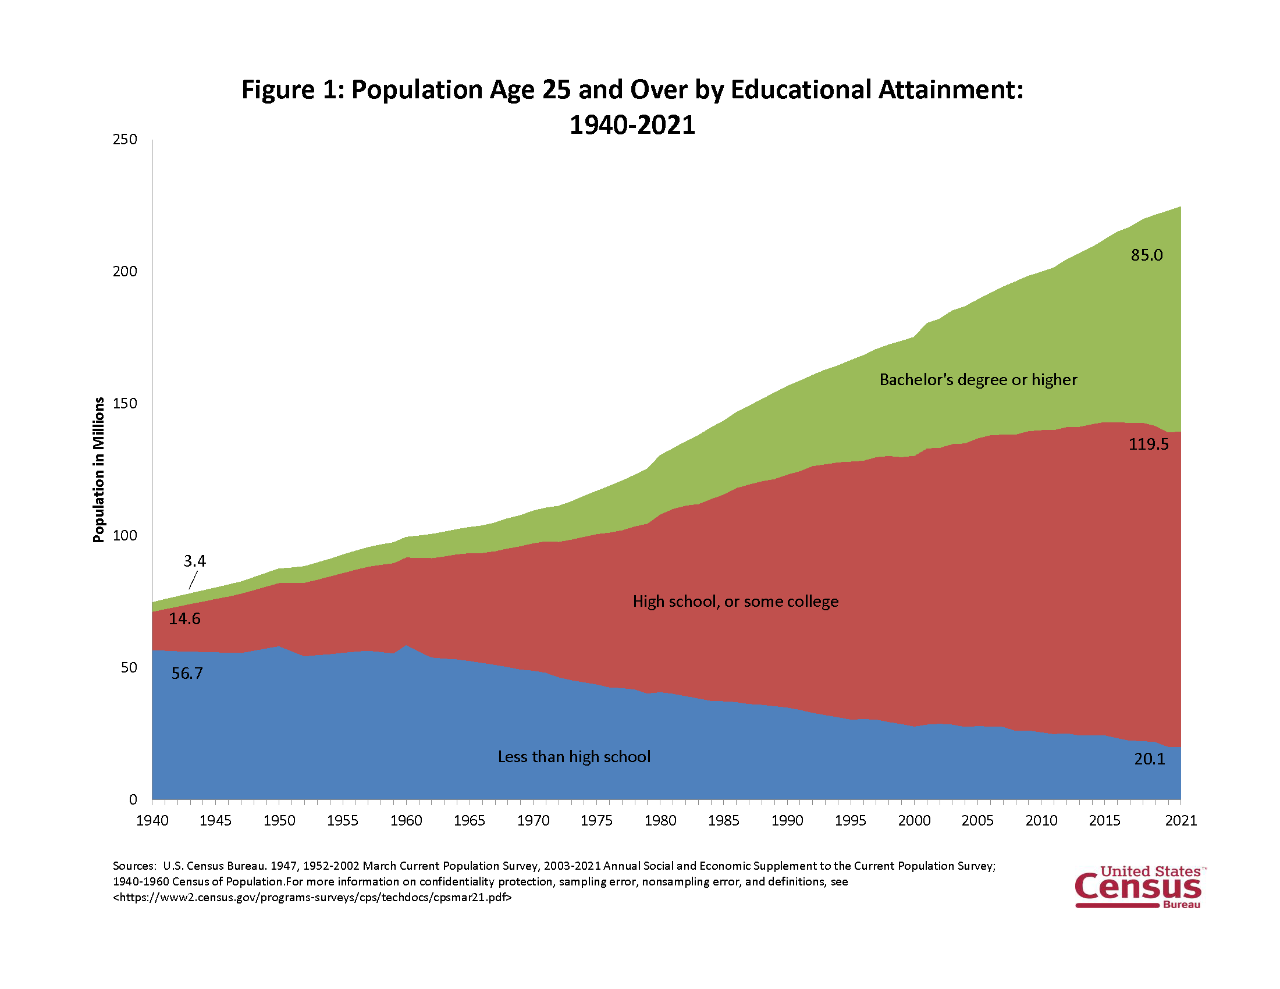 Figure 1: Population Age 25 and over by Educational Attainment: 1940-2021